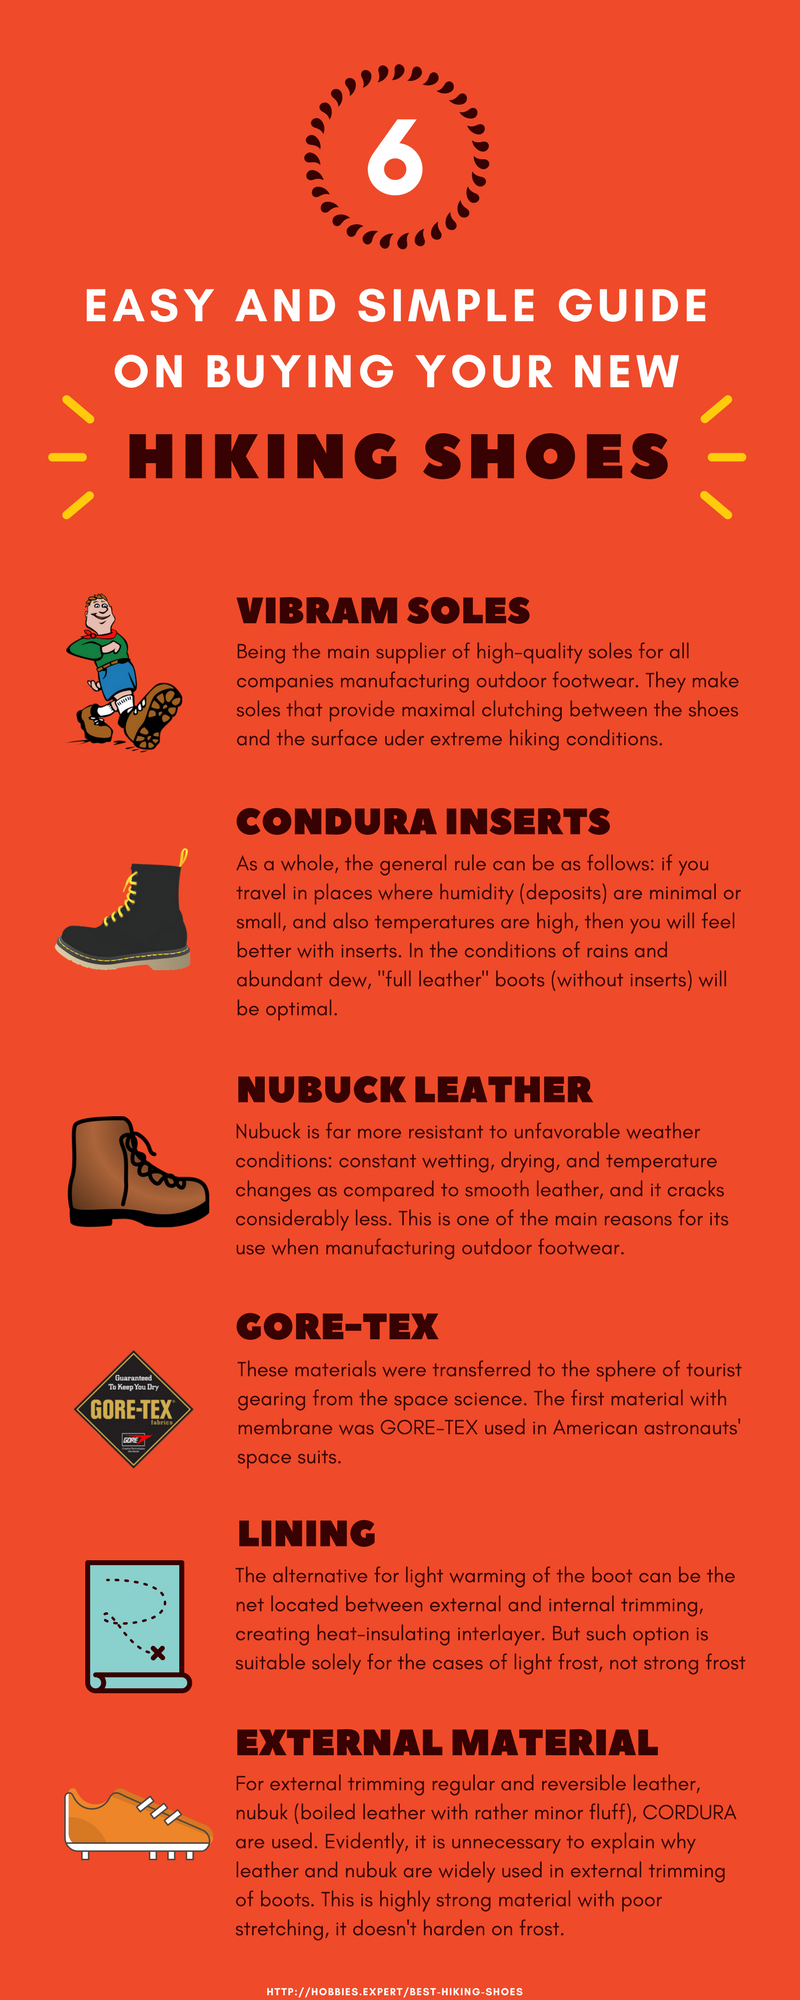 Are Crocs good for Park Rangers?